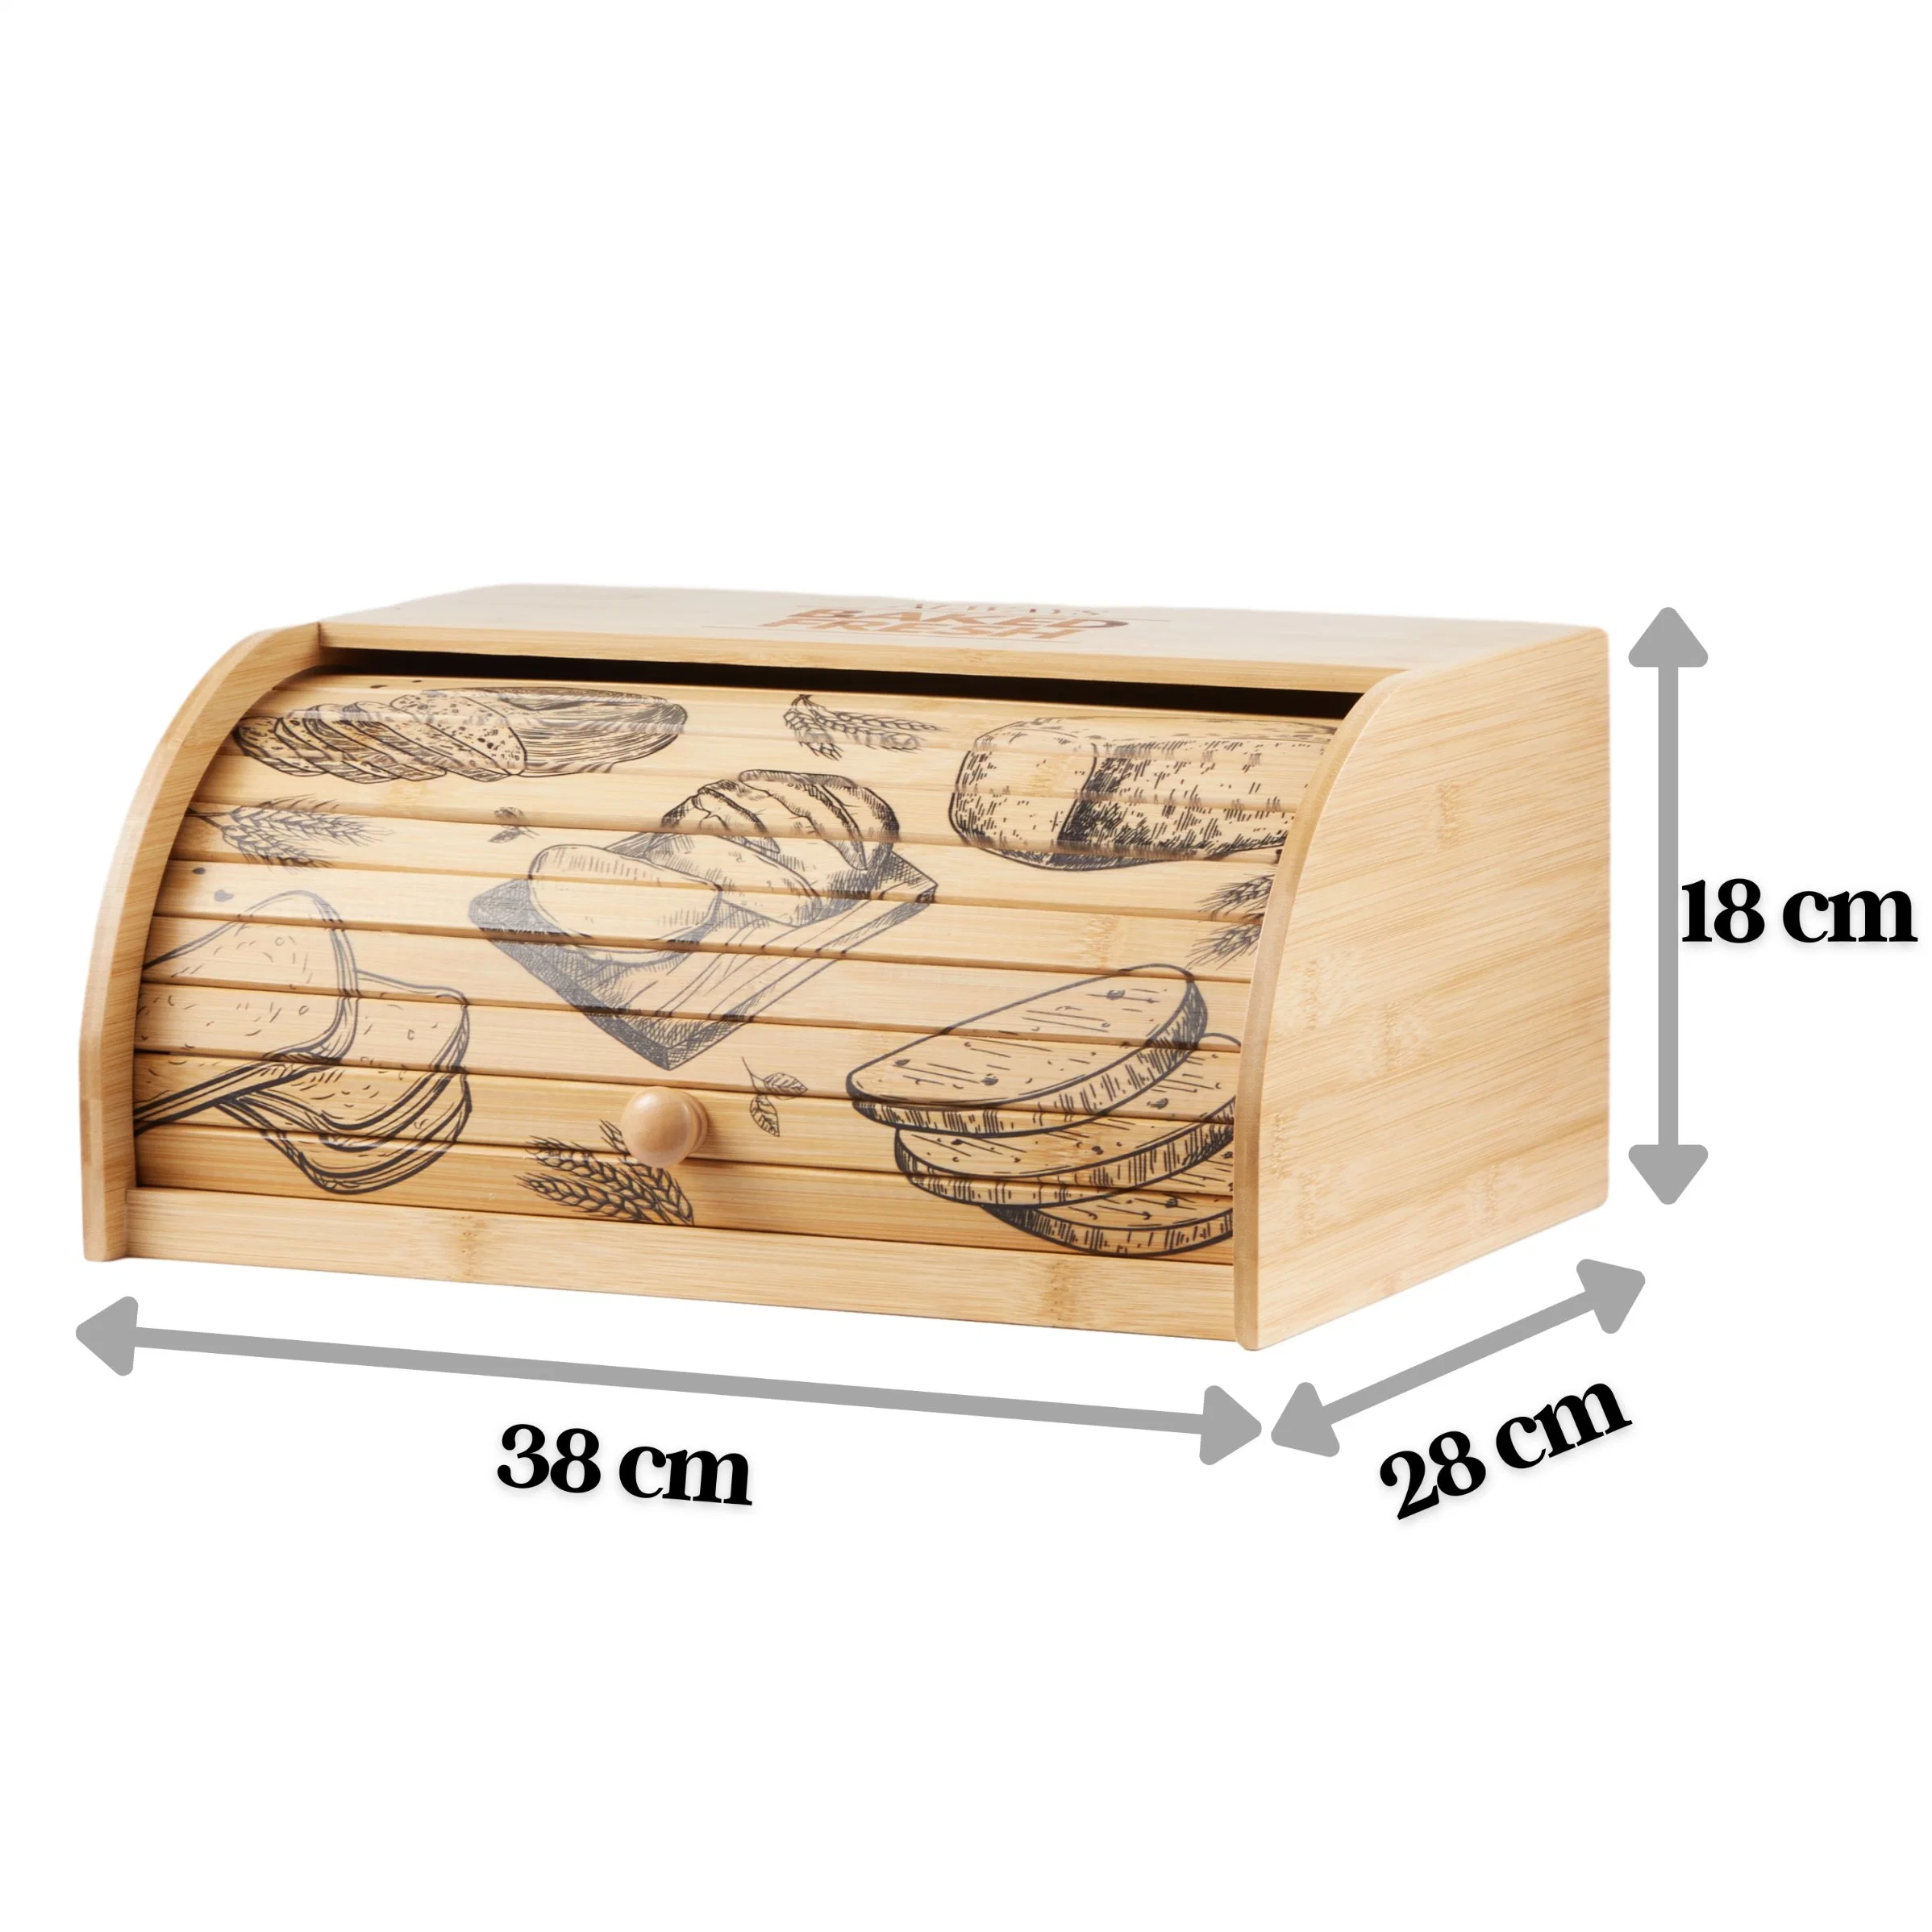 Bread Box with Roll Lid Made of Sustainable Bamboo